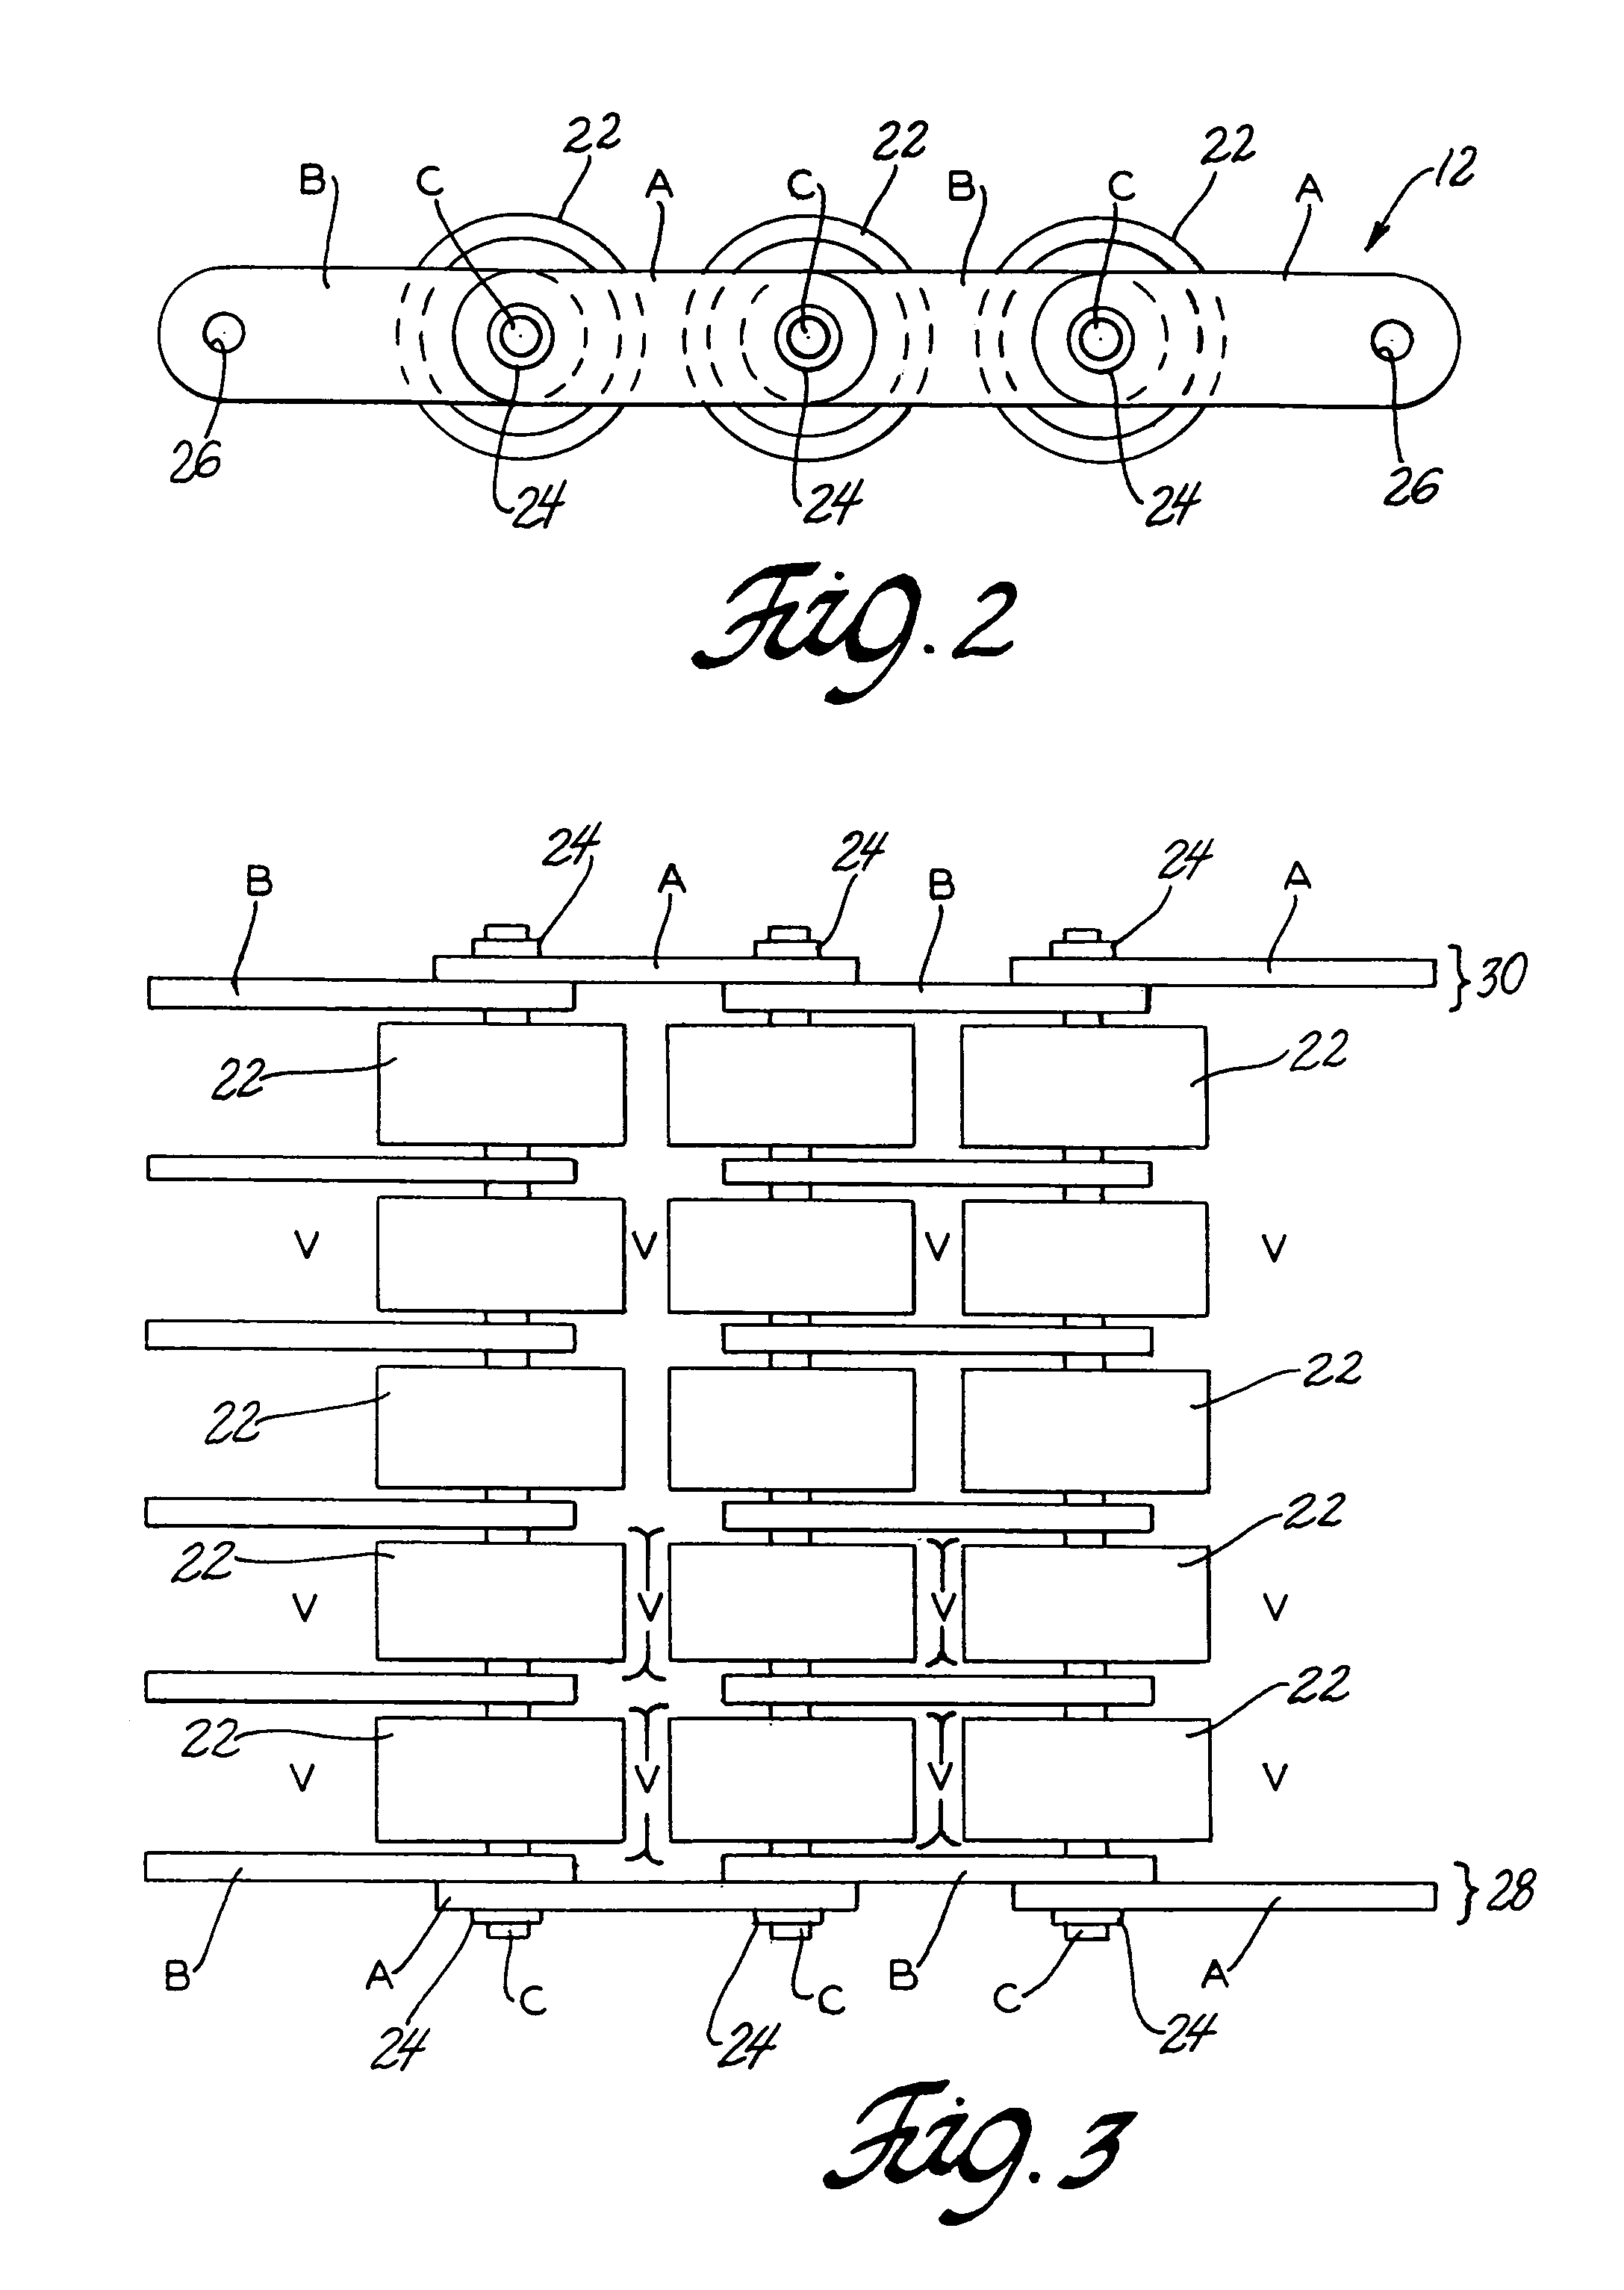 Apparatus and method for ballistic protection of vehicle undercarriages